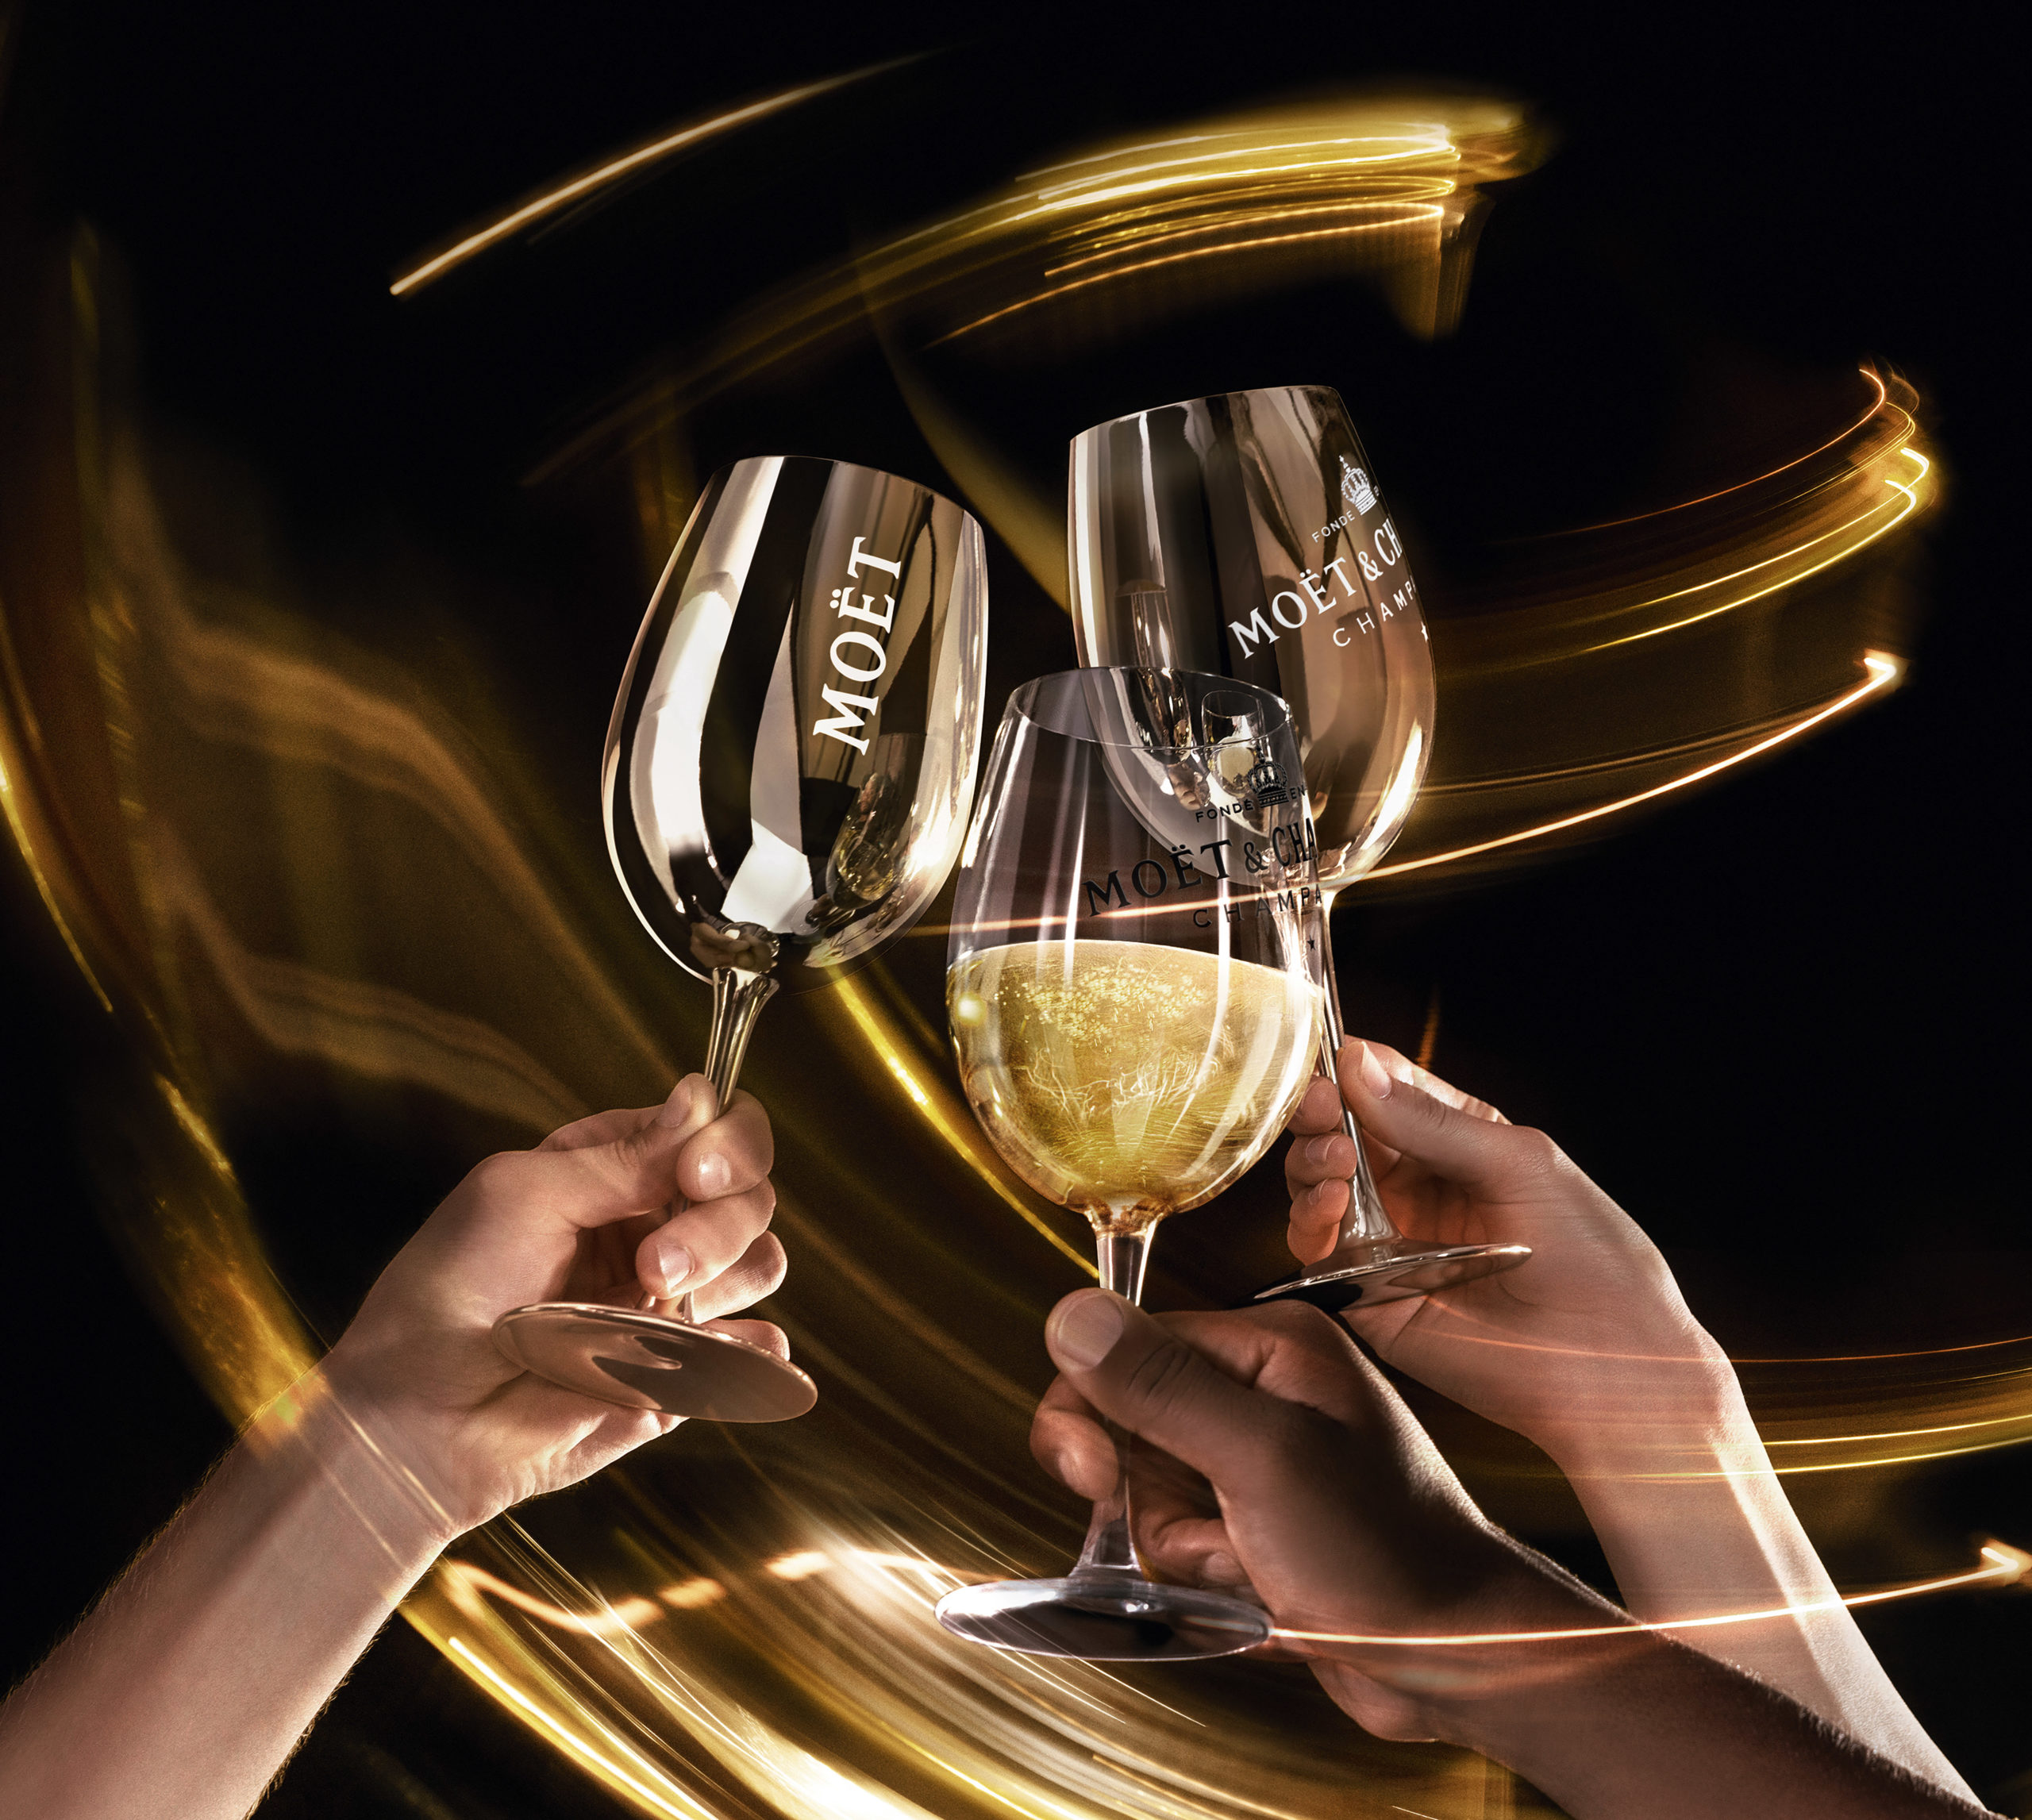 Celebrate The Joy Of Togetherness this Festive Season with Moët